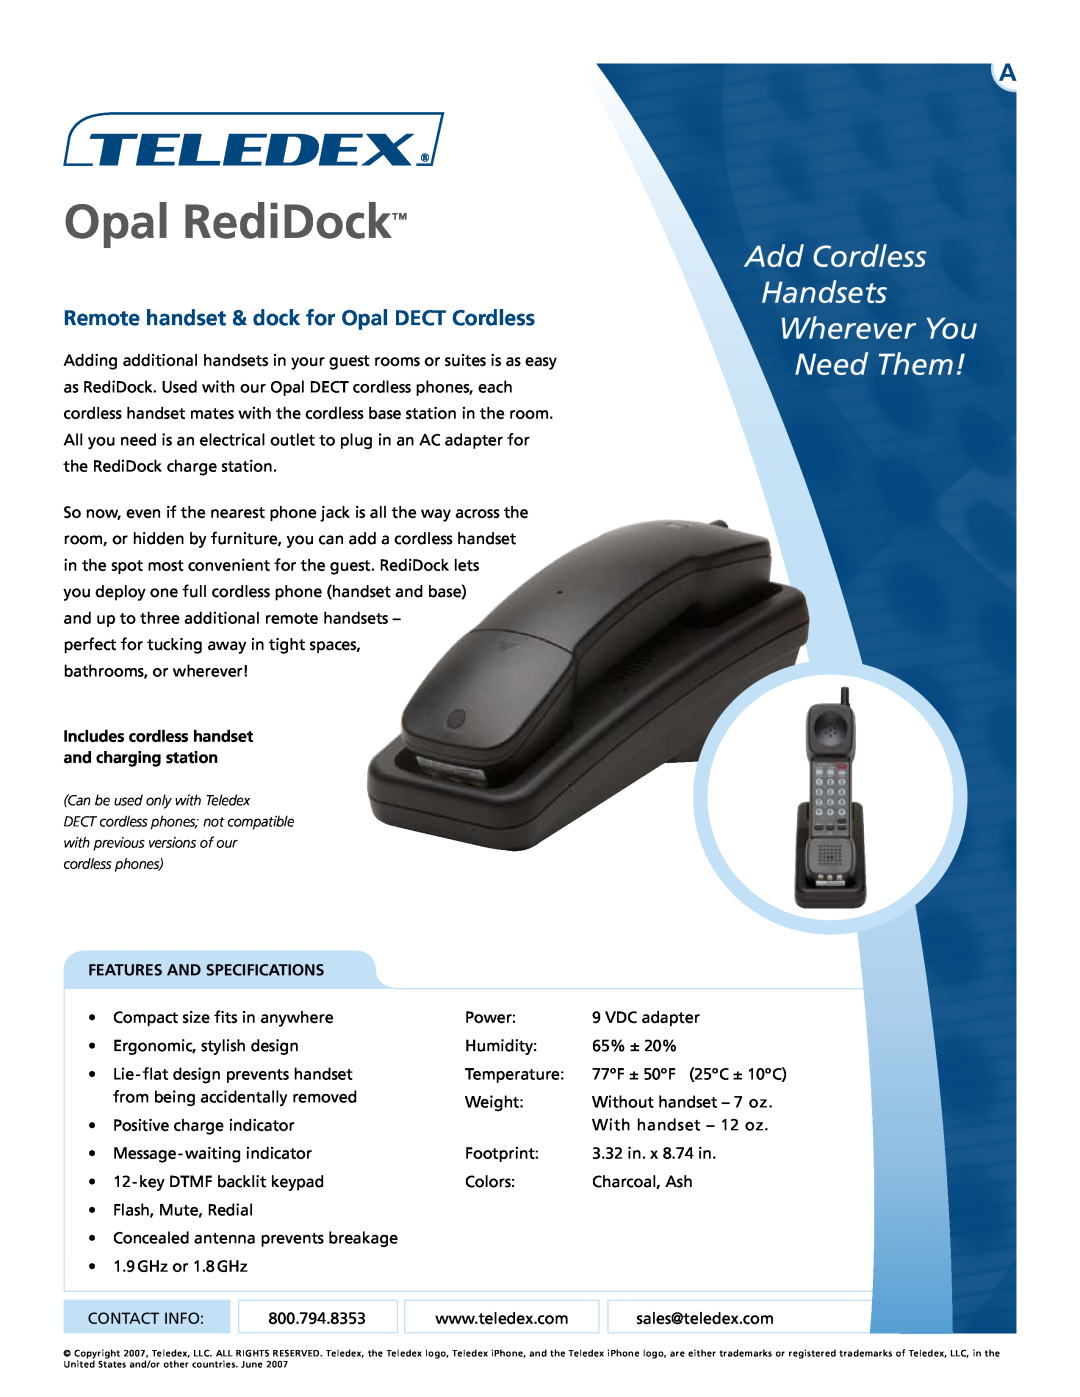 Teledex Opal RediDock specifications Add Cordless Handsets Wherever You Need Them, Features And Specifications 